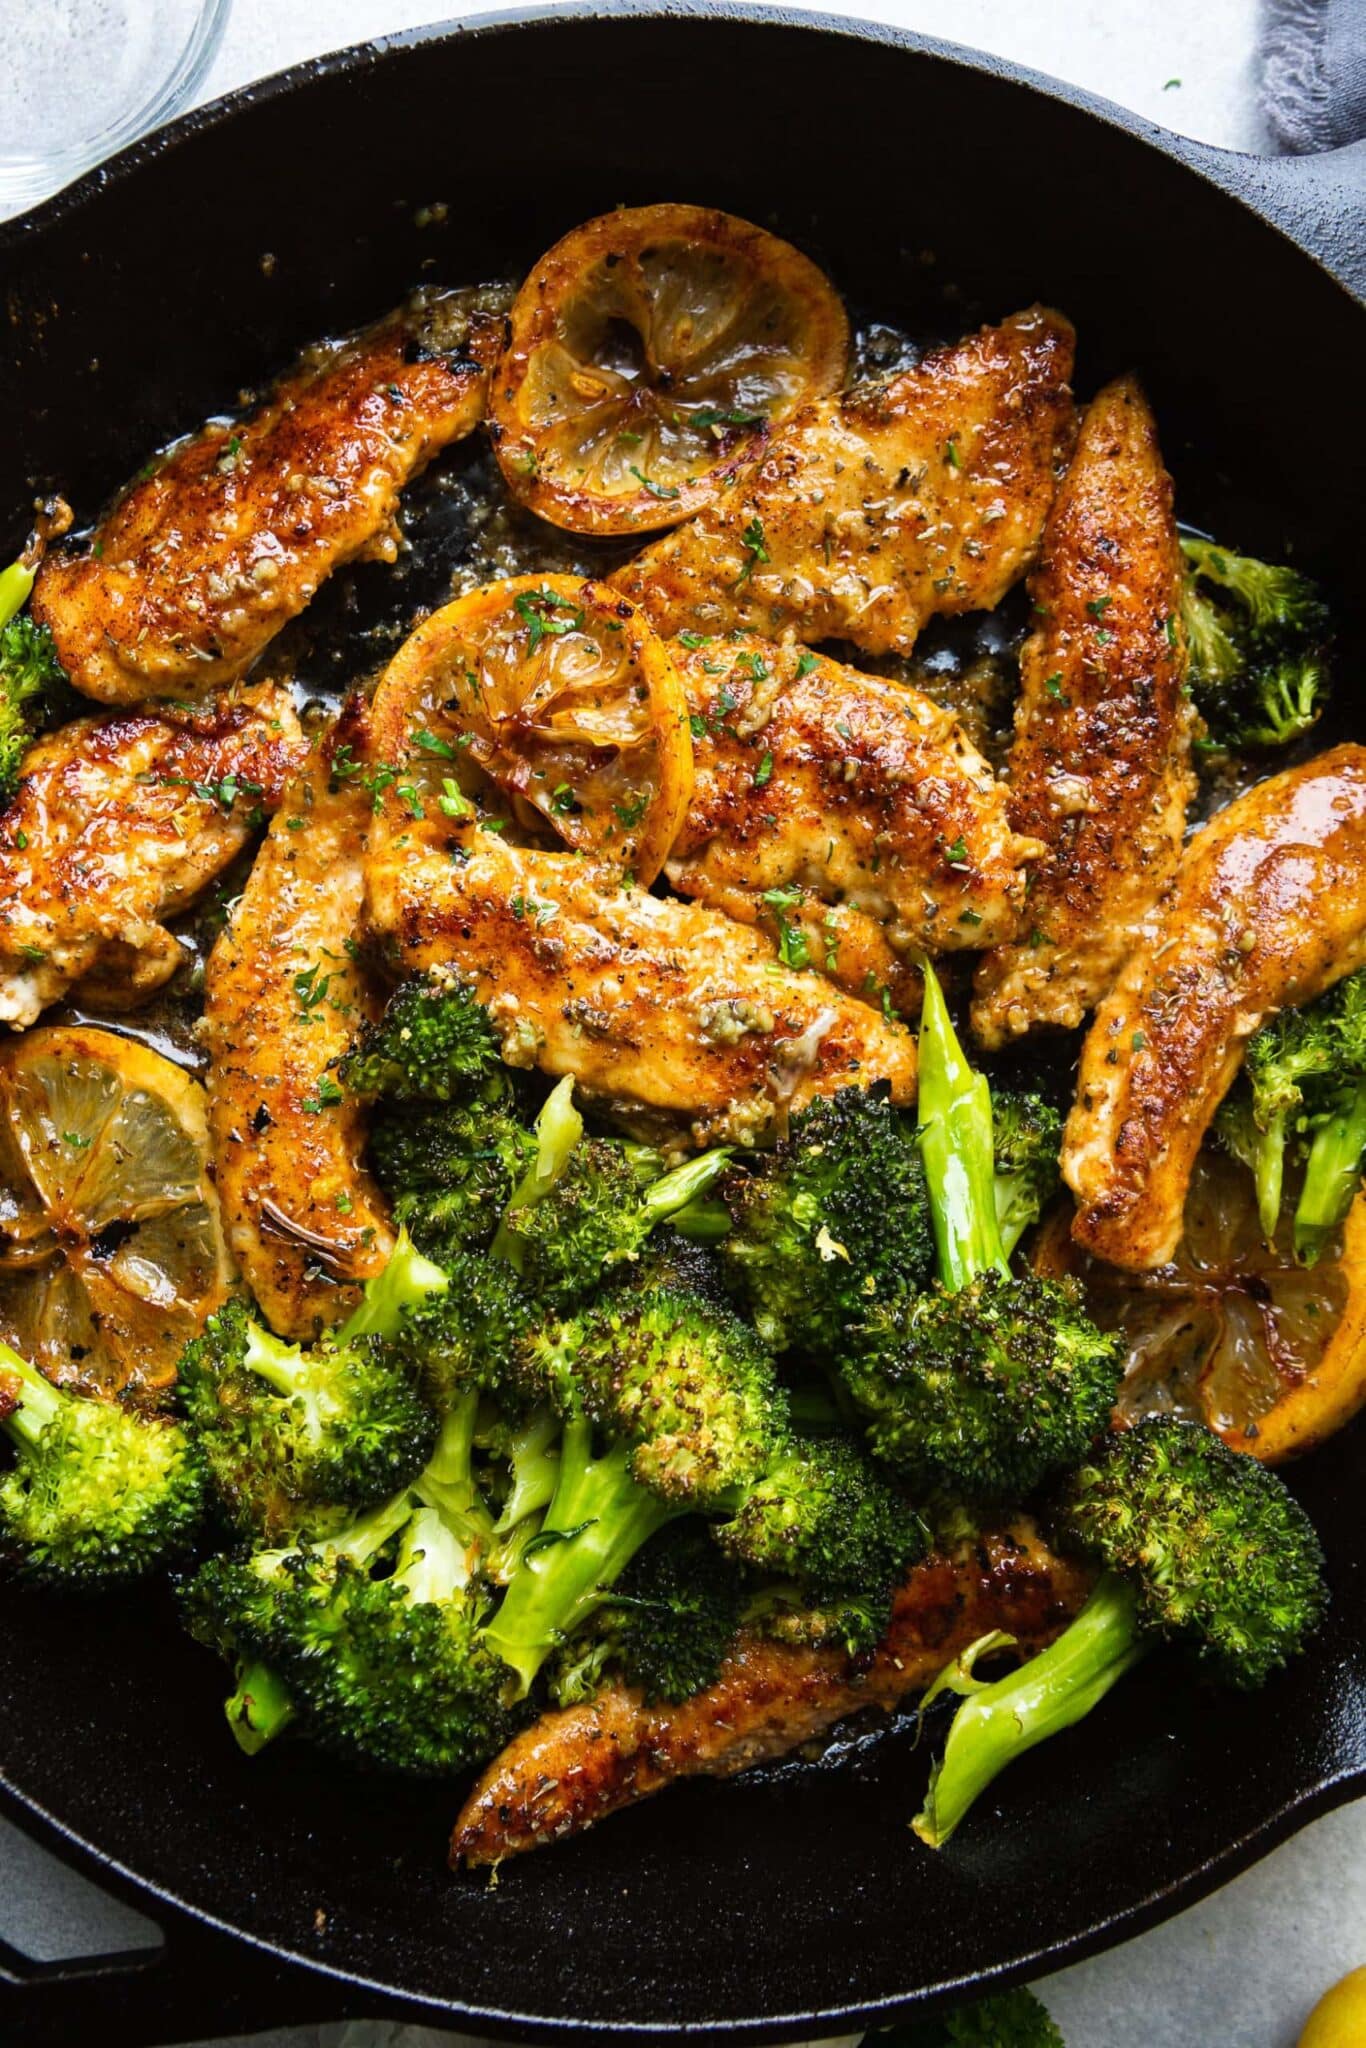 Chicken and broccoli in a skillet with lemon slices.